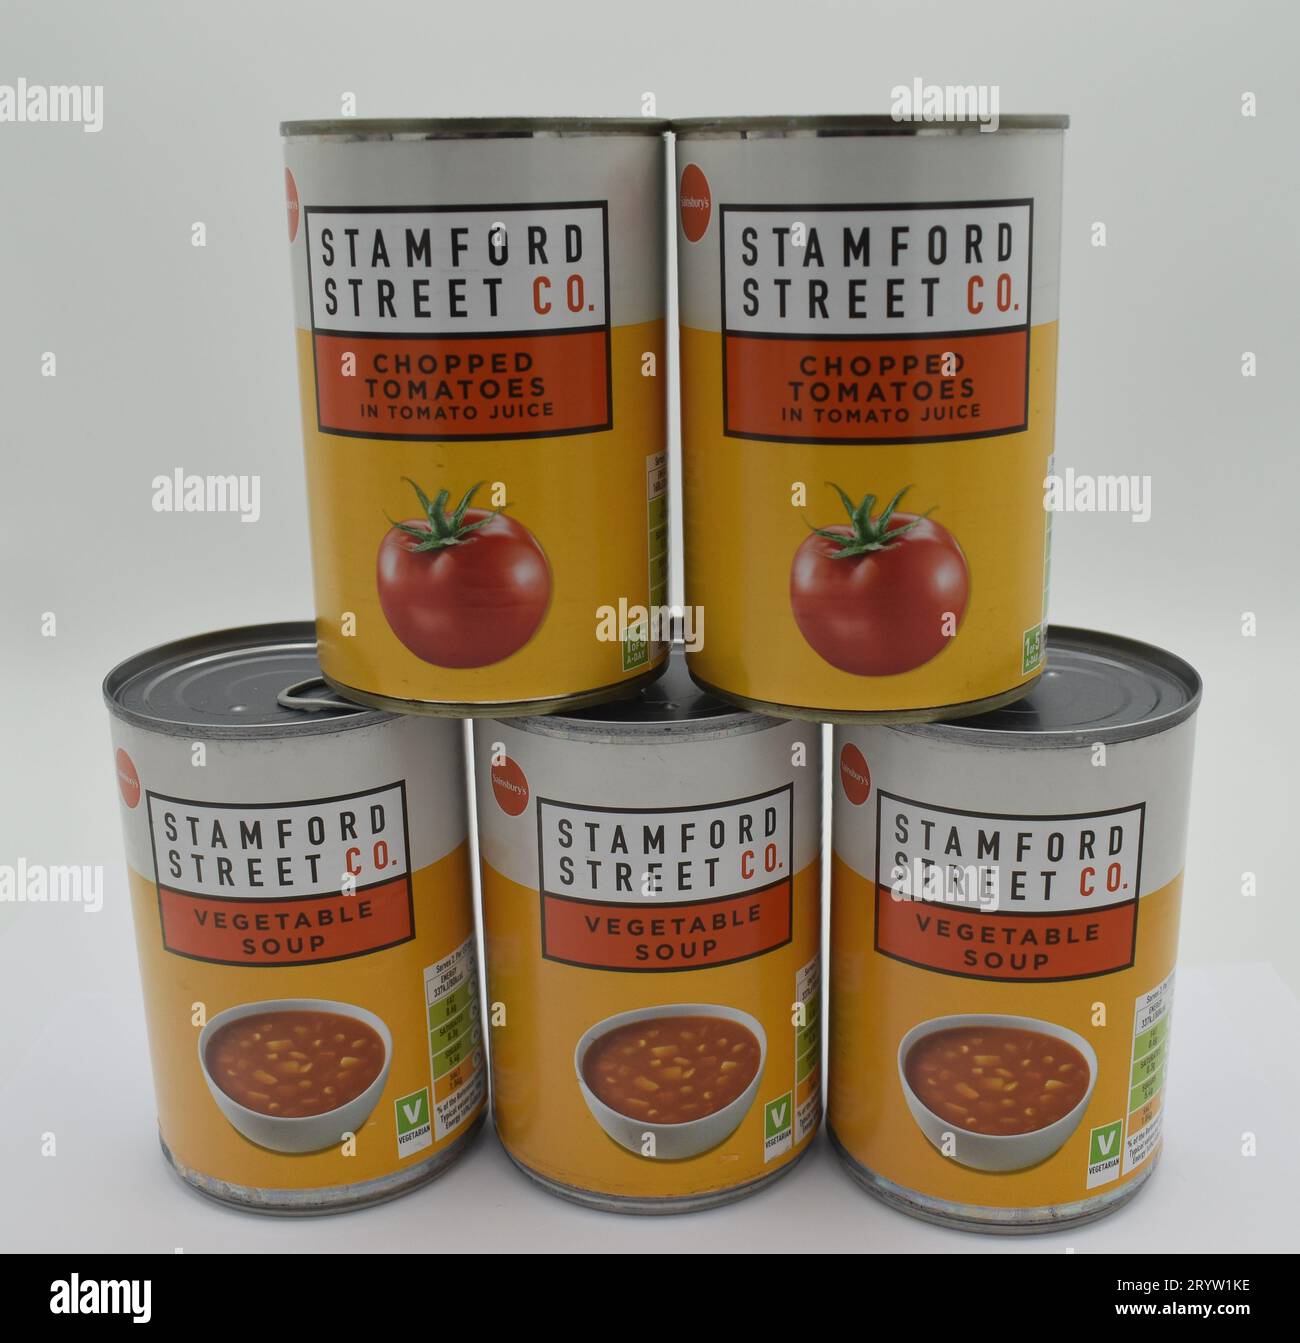 Sainsbury's supermarket has moved its value brands, including tinned soup and tinned tomatoes, to a new label - Stamford Street Co. Stock Photo